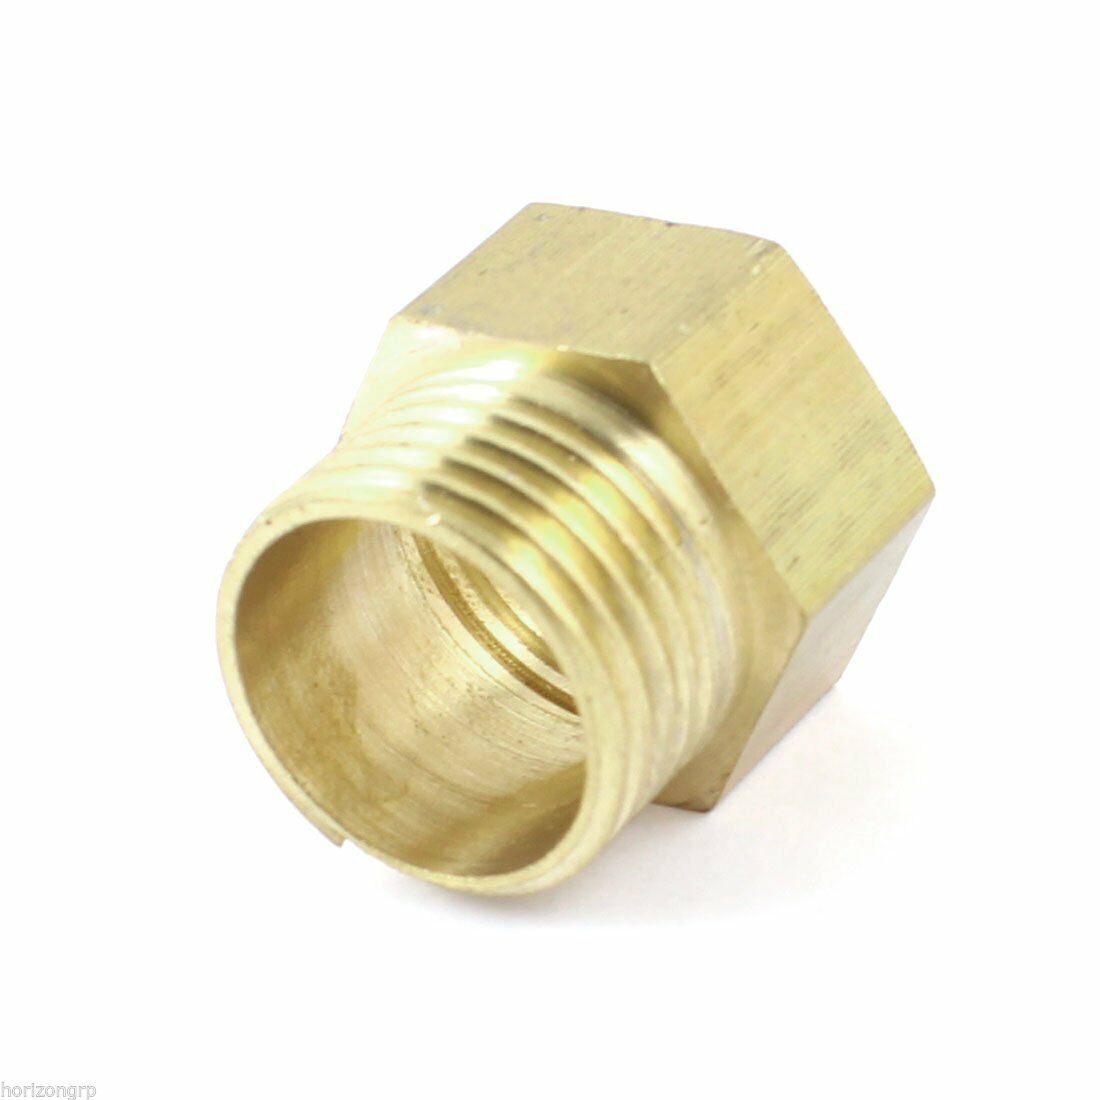 Primary image for Cascada Showers Metric BSP G 1/2" Male to NPT 1/2" Female Pipe Fitting Adapter